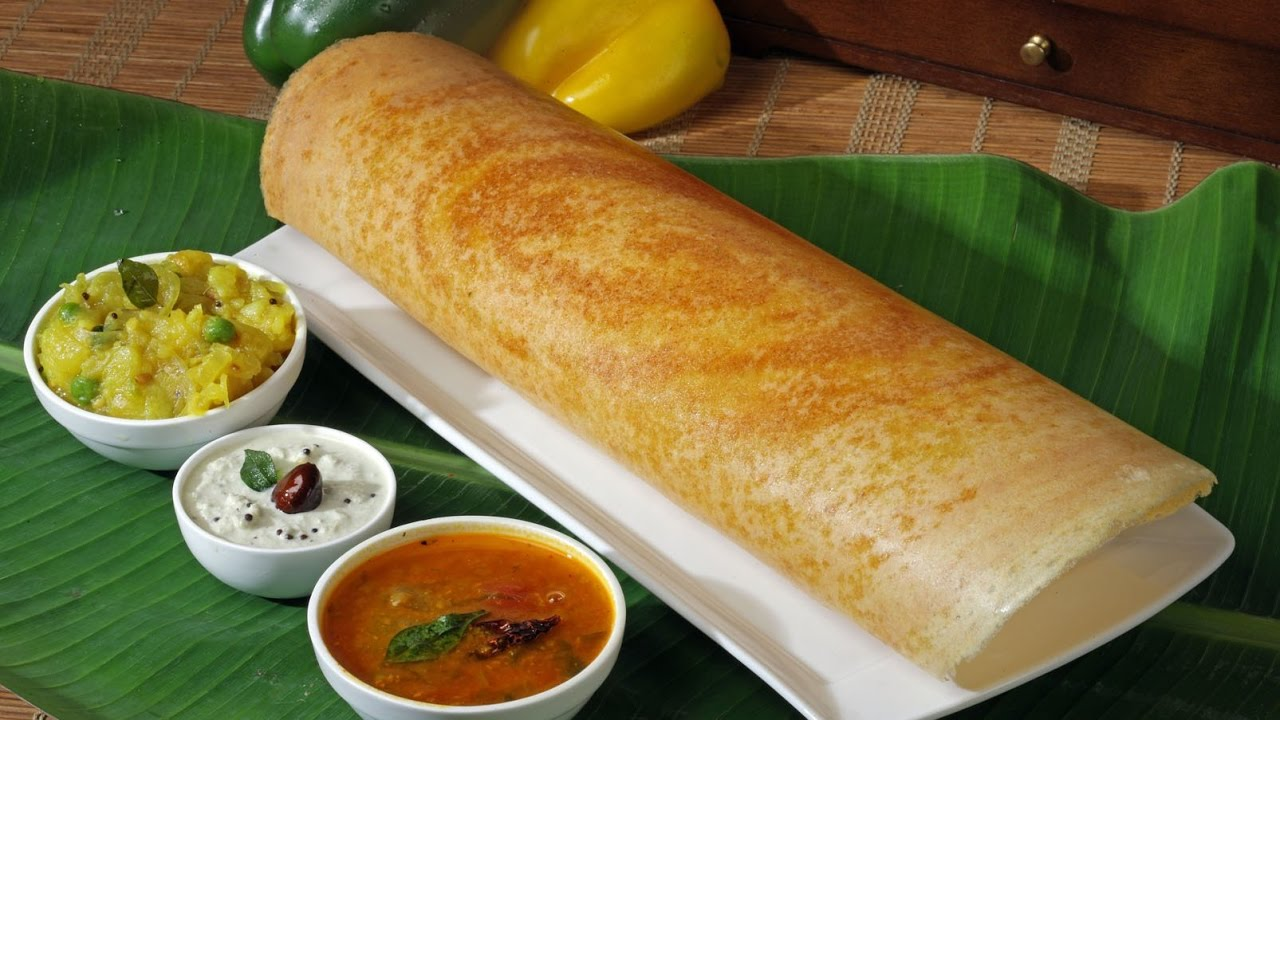 Cheese Dosa - Served with Coconut chutney and sambhar curry